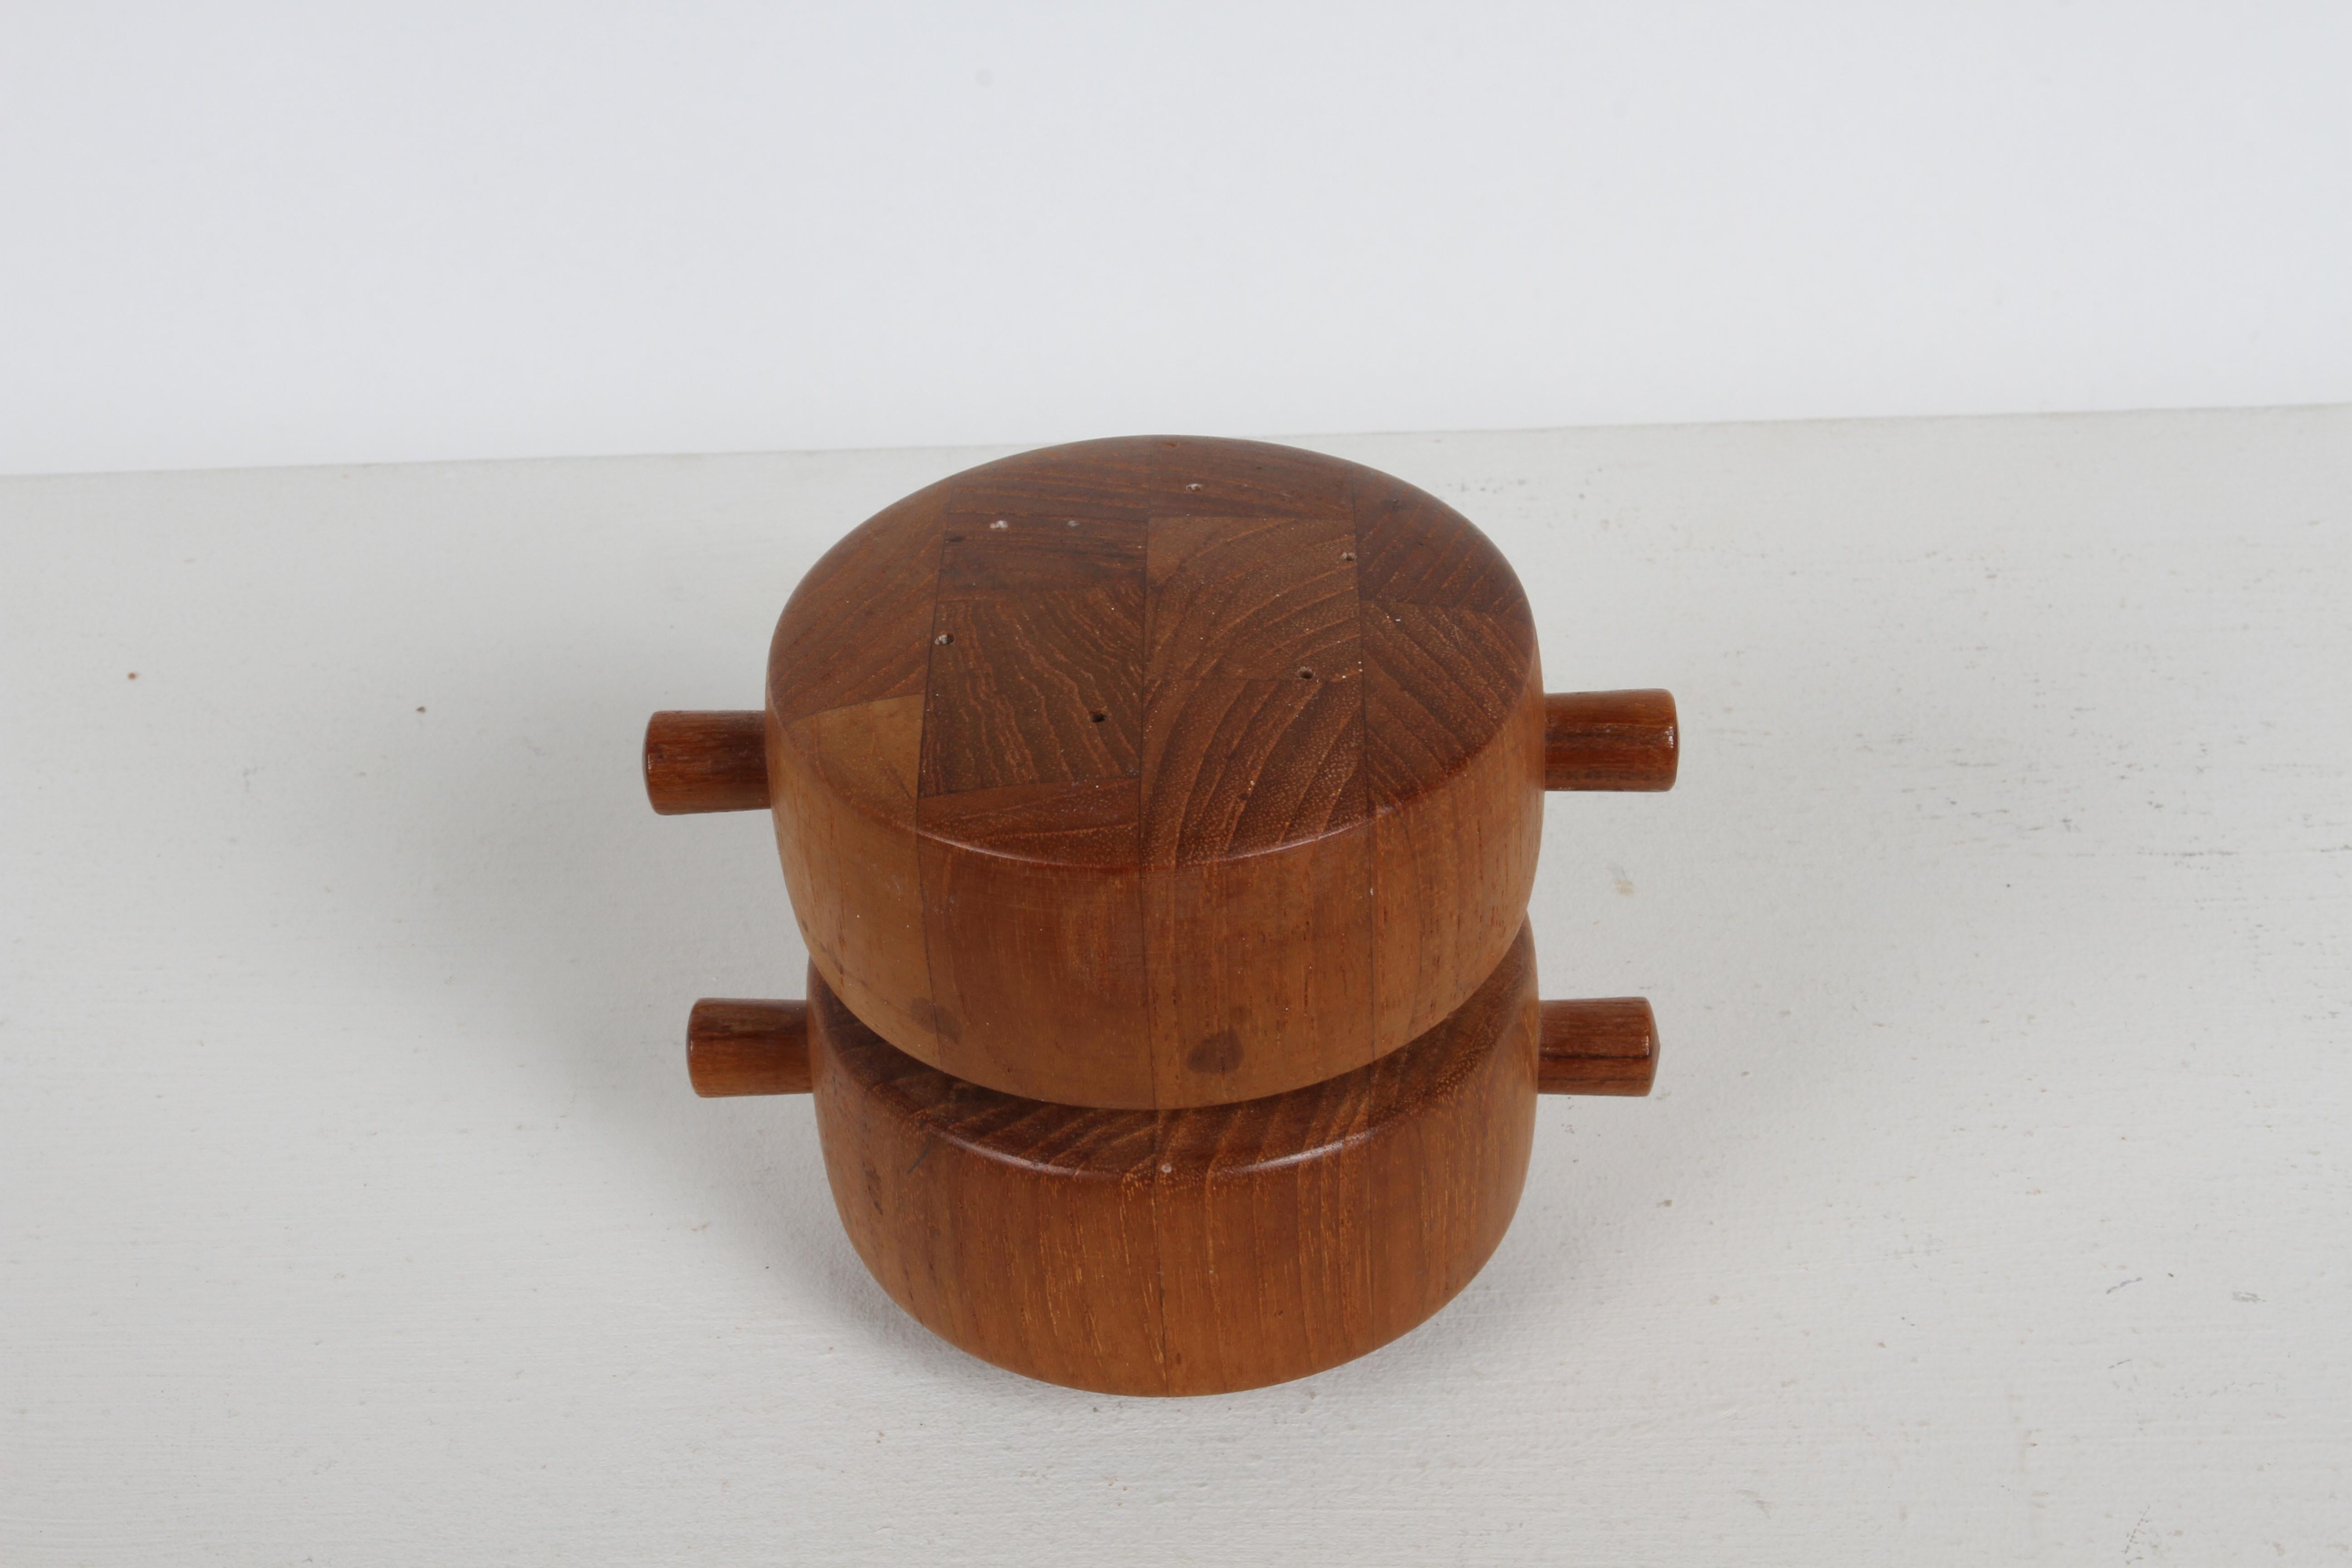 A 1960s Danish Modern Jens Quistgaard Salt & peppermill made of teak, with two cylinder compartments. Stamped Dansk Designs Ltd Denmark JHQ. Nice original condition. 

Ground pepper comes out of the bottom when cylinder turns and salt sprinkles from